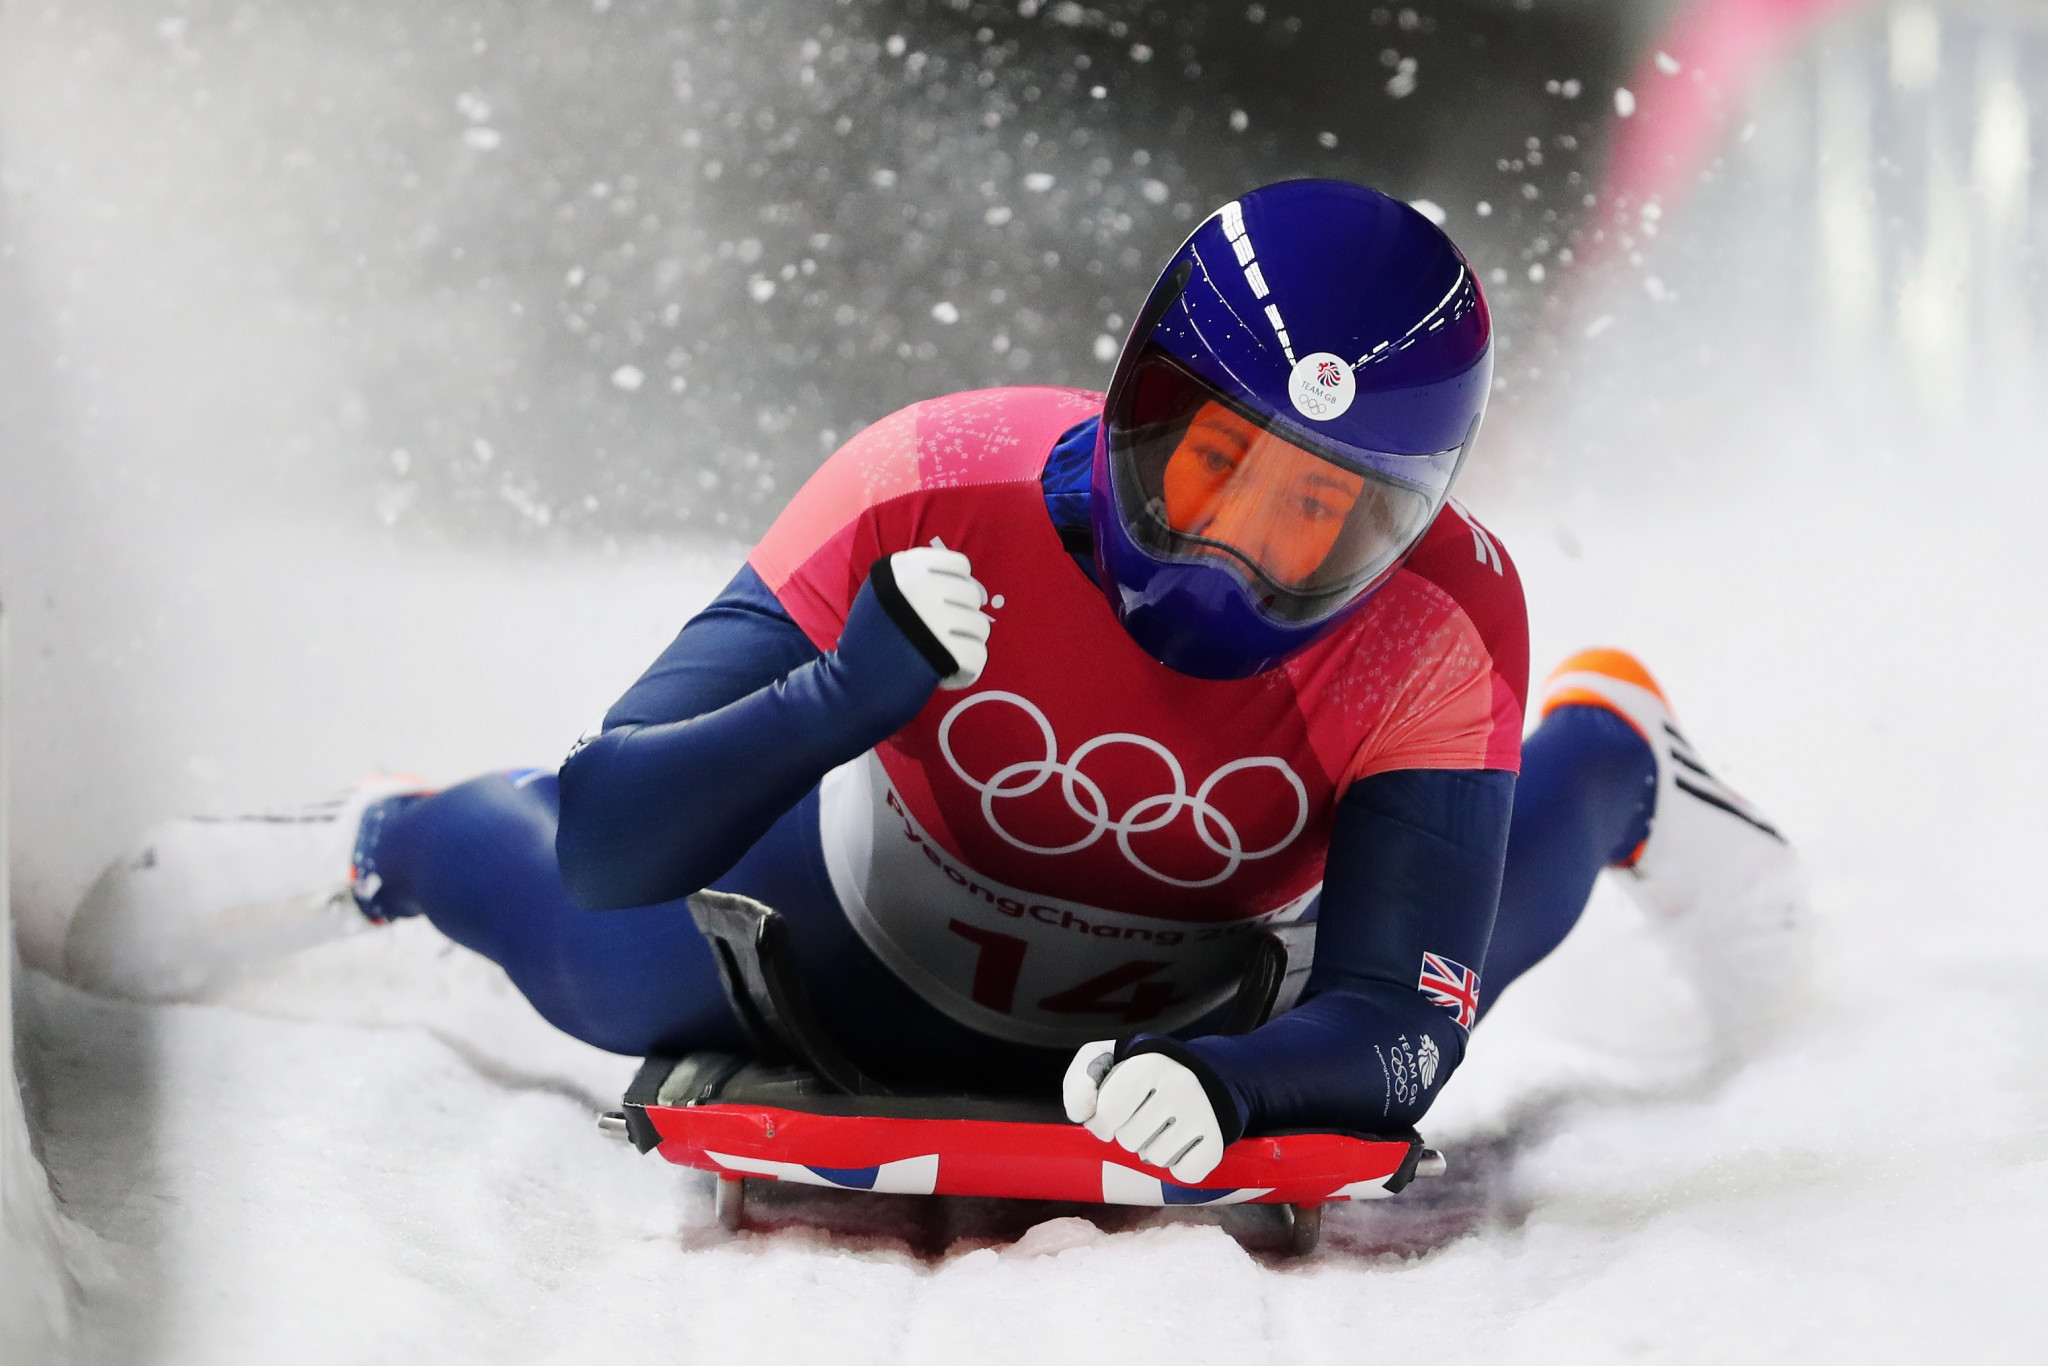 Skeleton athlete Lizzy Yarnold is Britain's most successful Winter Olympian with two gold medals, coming at Sochi 2014 and Pyeongchang 2018 ©Getty Images